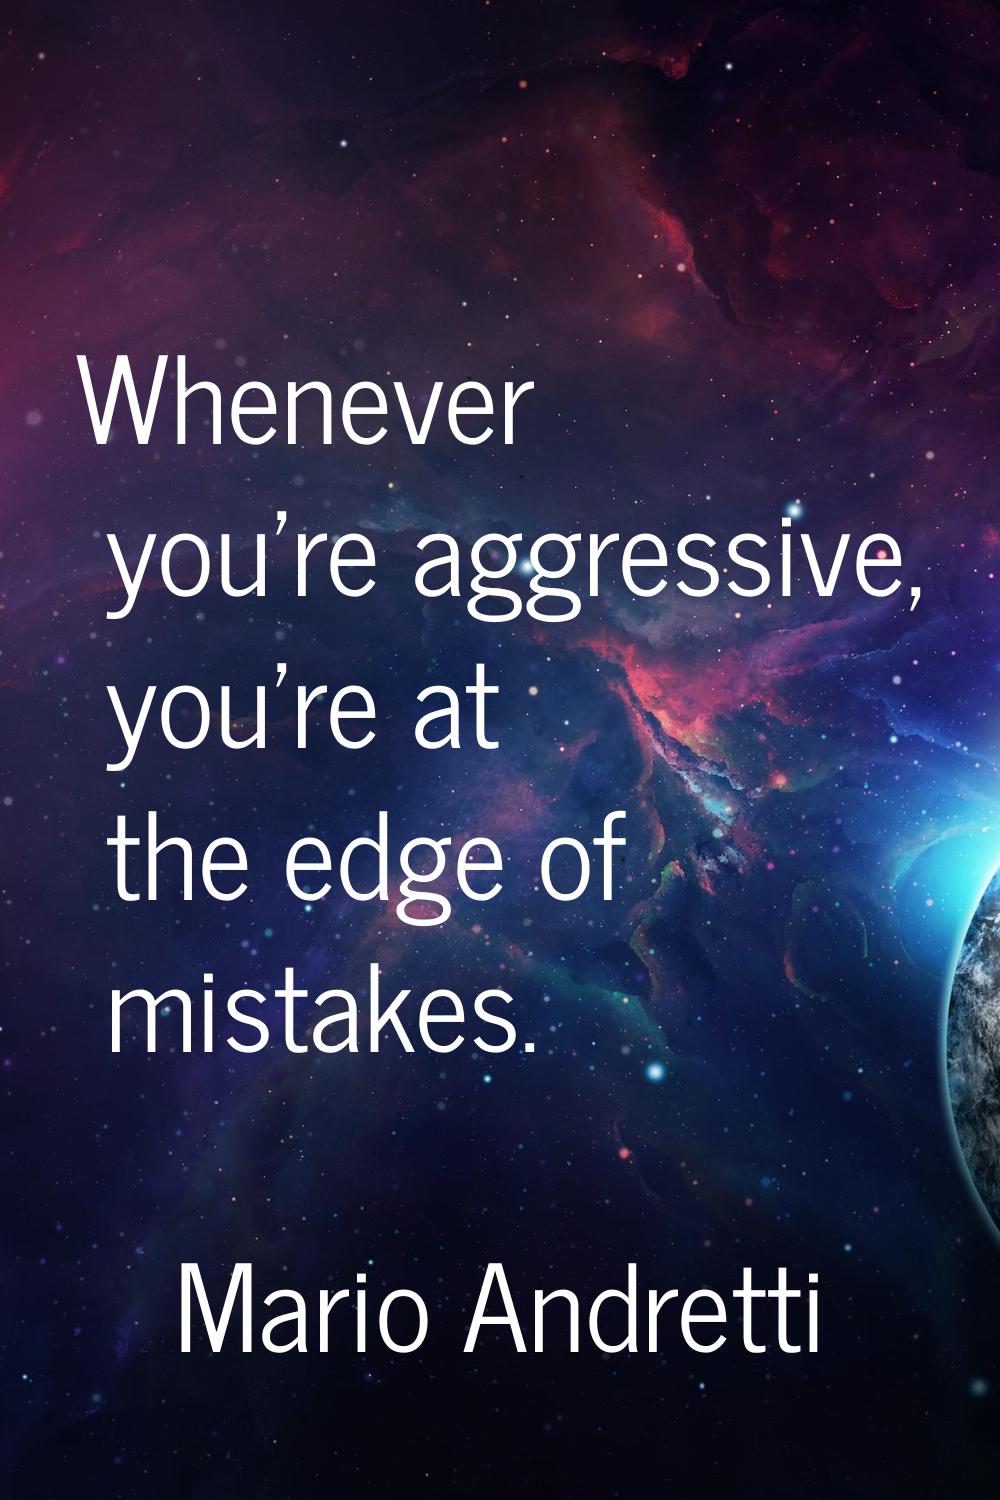 Whenever you're aggressive, you're at the edge of mistakes.